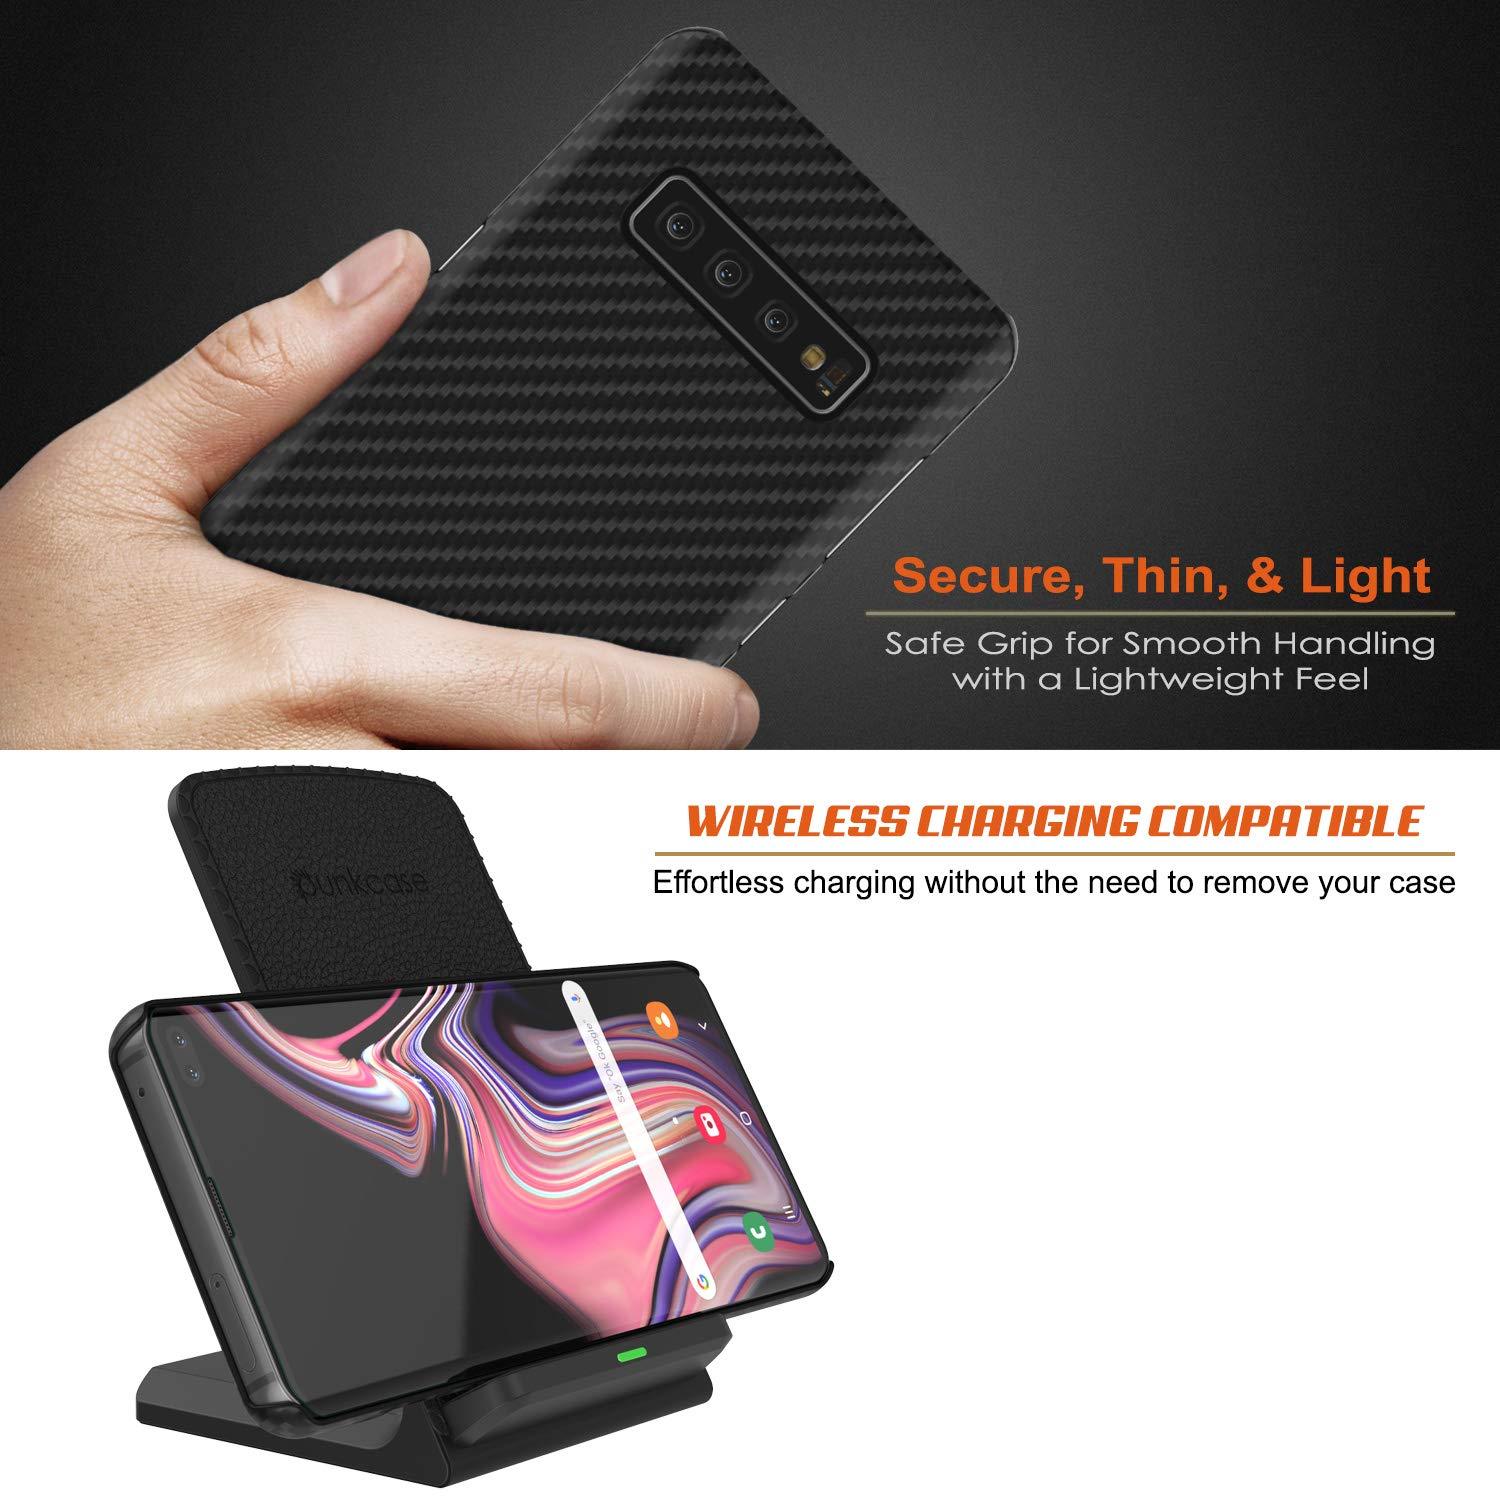 Galaxy S20+ Plus Case, Punkcase CarbonShield, Heavy Duty & Ultra Thin 2 Piece Dual Layer PU Leather Jet Black Cover (Carbon Fiber Style)